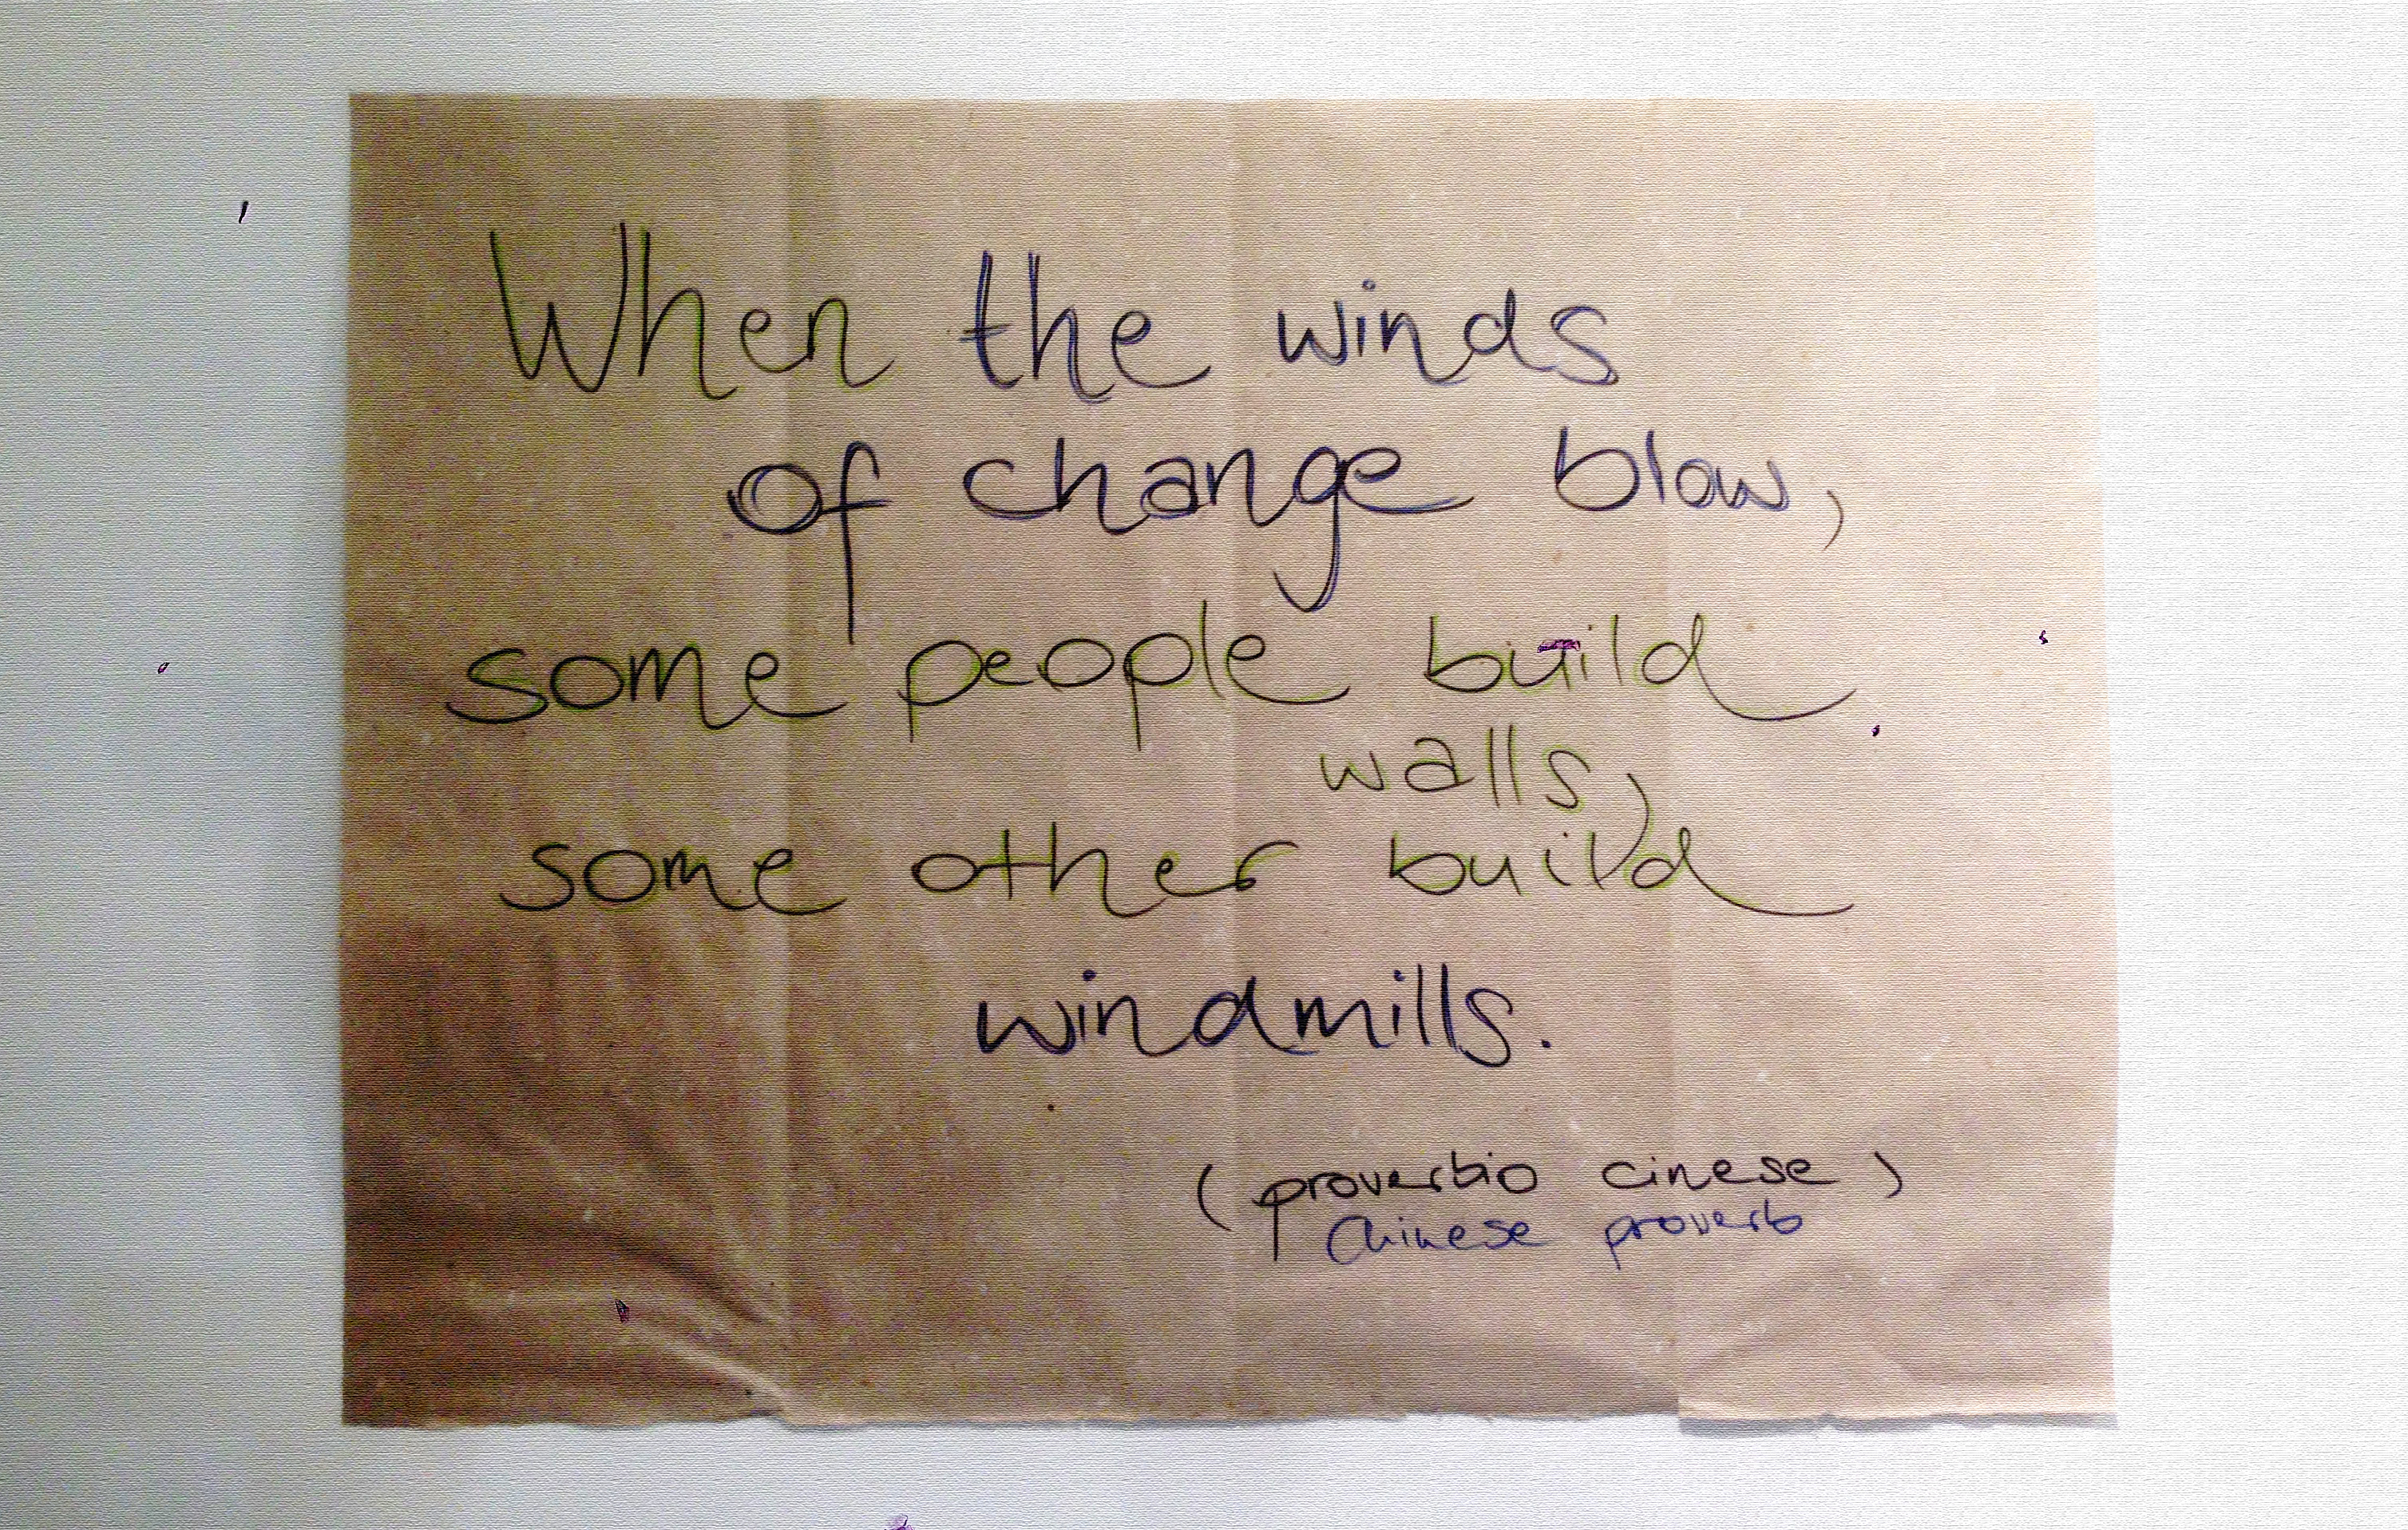 When the winds of change blow, some people build walls, some other build windmills. 